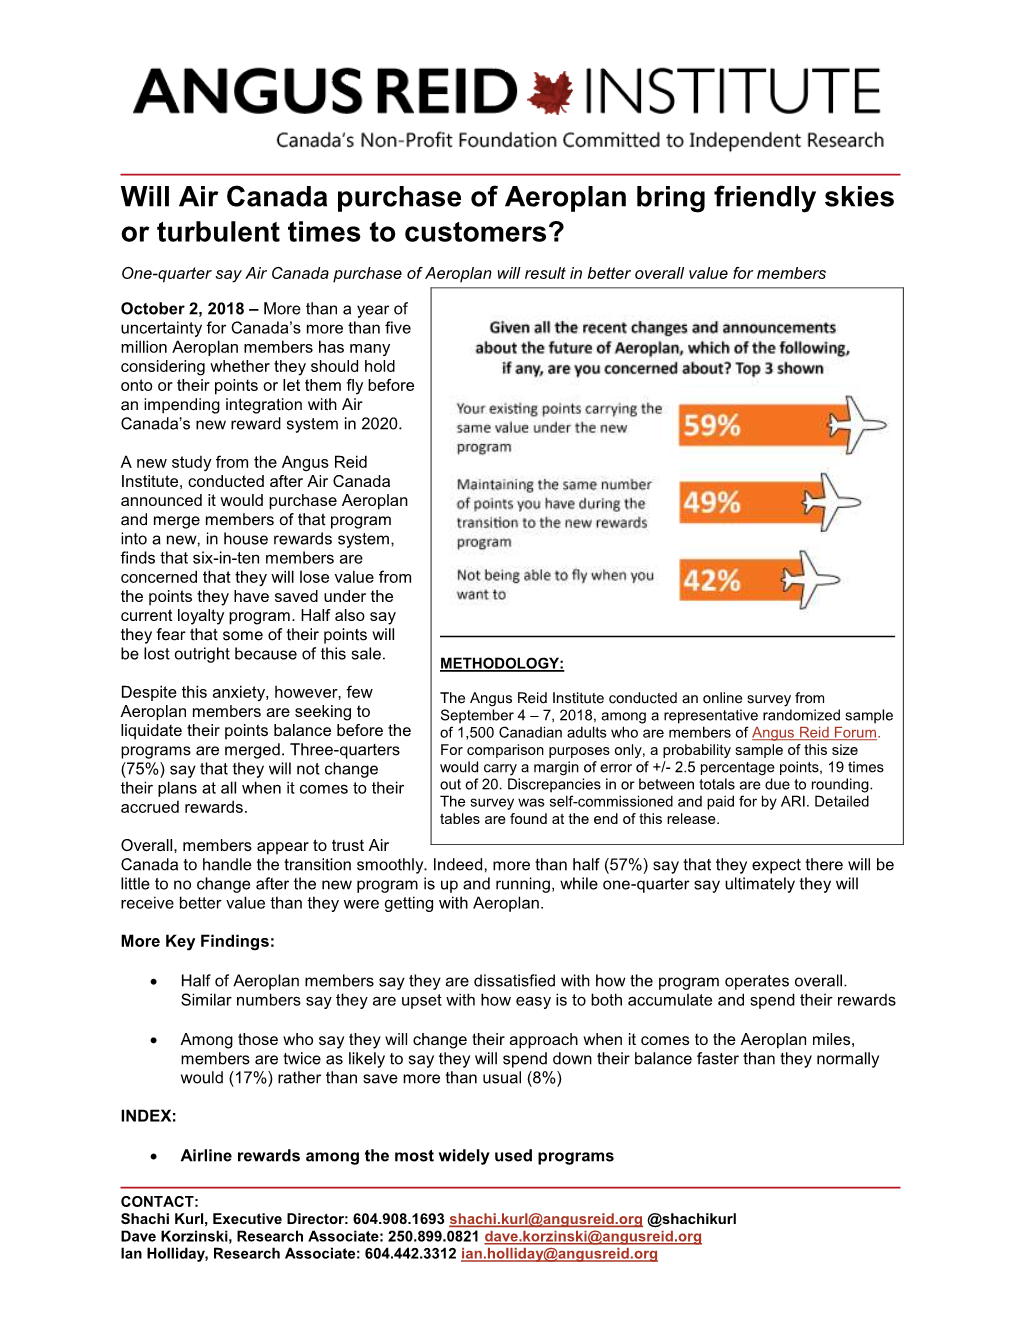 Will Air Canada Purchase of Aeroplan Bring Friendly Skies Or Turbulent Times to Customers?